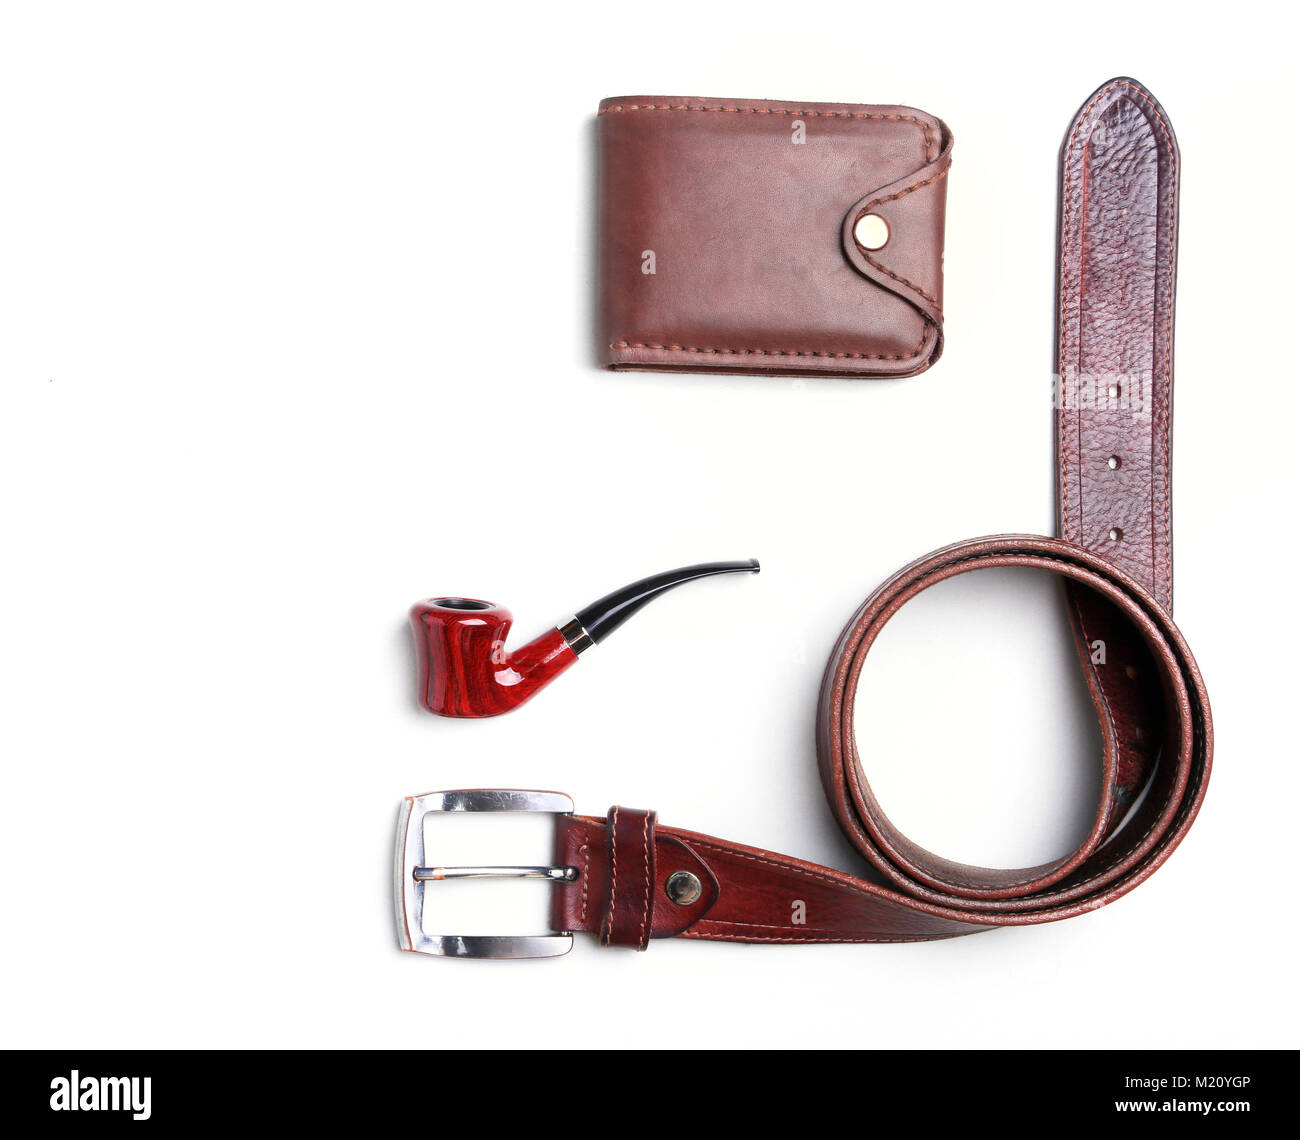 Men's accessories for business and rekreation. A professional studio photograph of men's business accessories. Top view composition Stock Photo